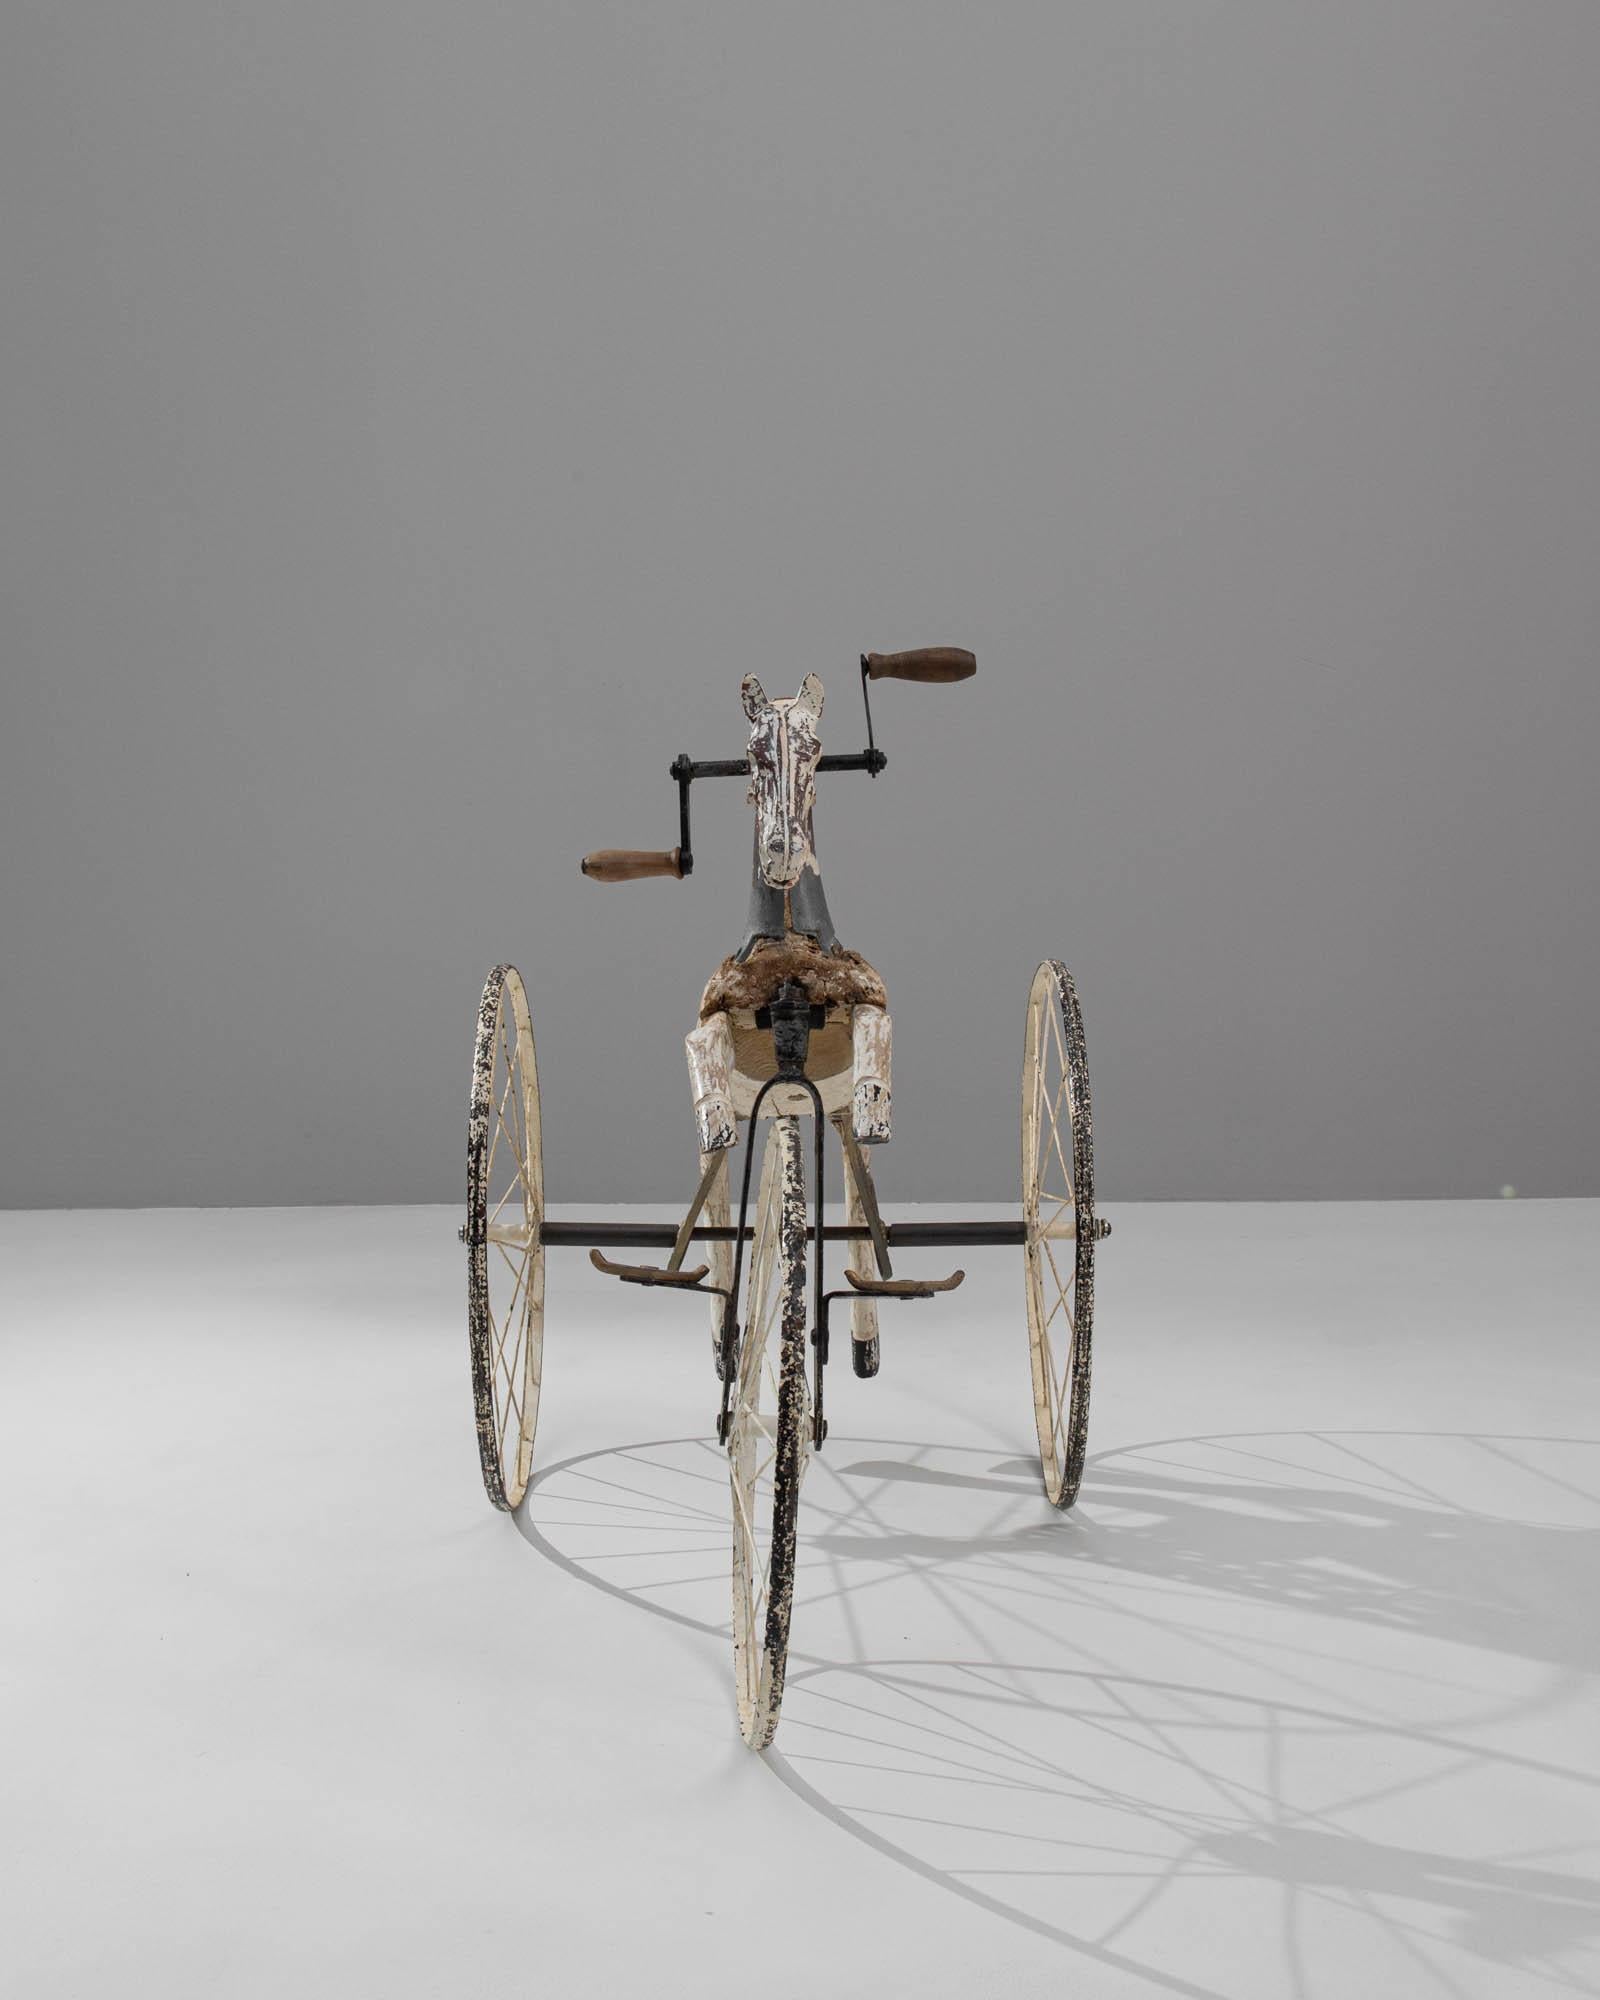 A wooden and metal horse tricycle created in France circa 1900. Vibrant yet seasoned and matured, this sprung horse glides on metal wheels that roll it gracefully into modernity. Through the passing of time, the white paint that coats both the